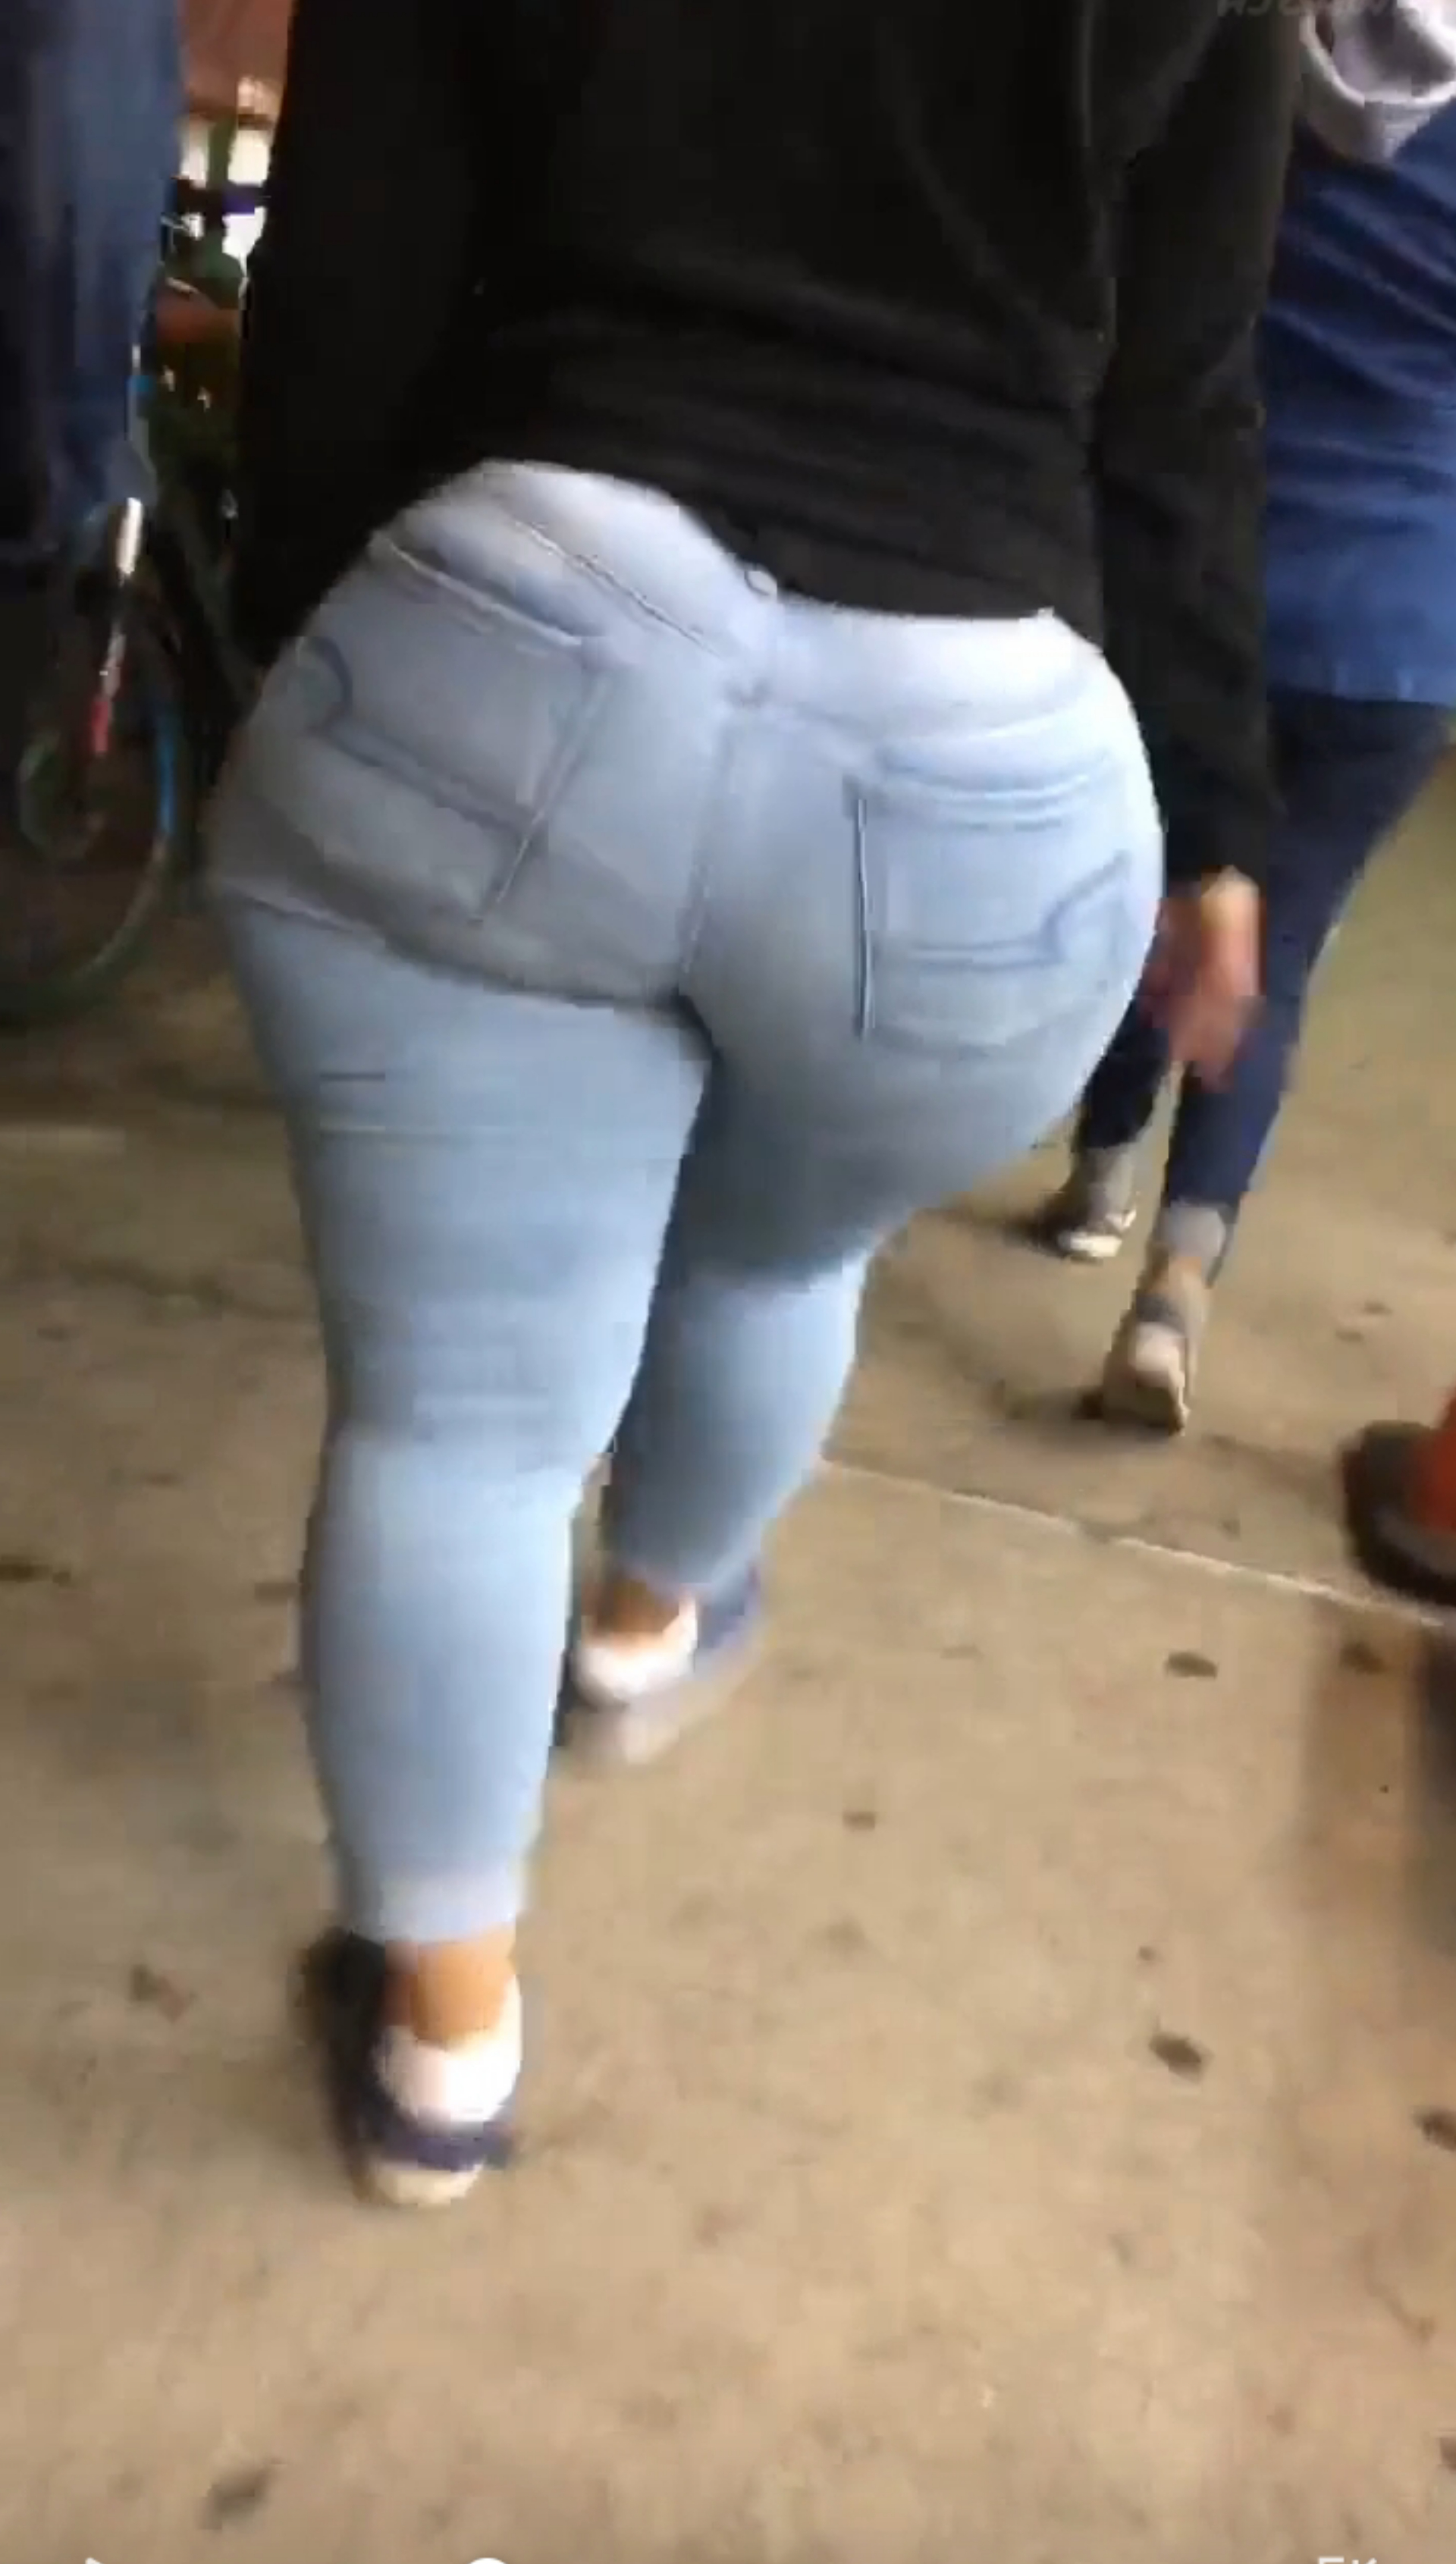 EPIC WIDE LOAD MEGA ASS STARTED RUNNING FROM IT